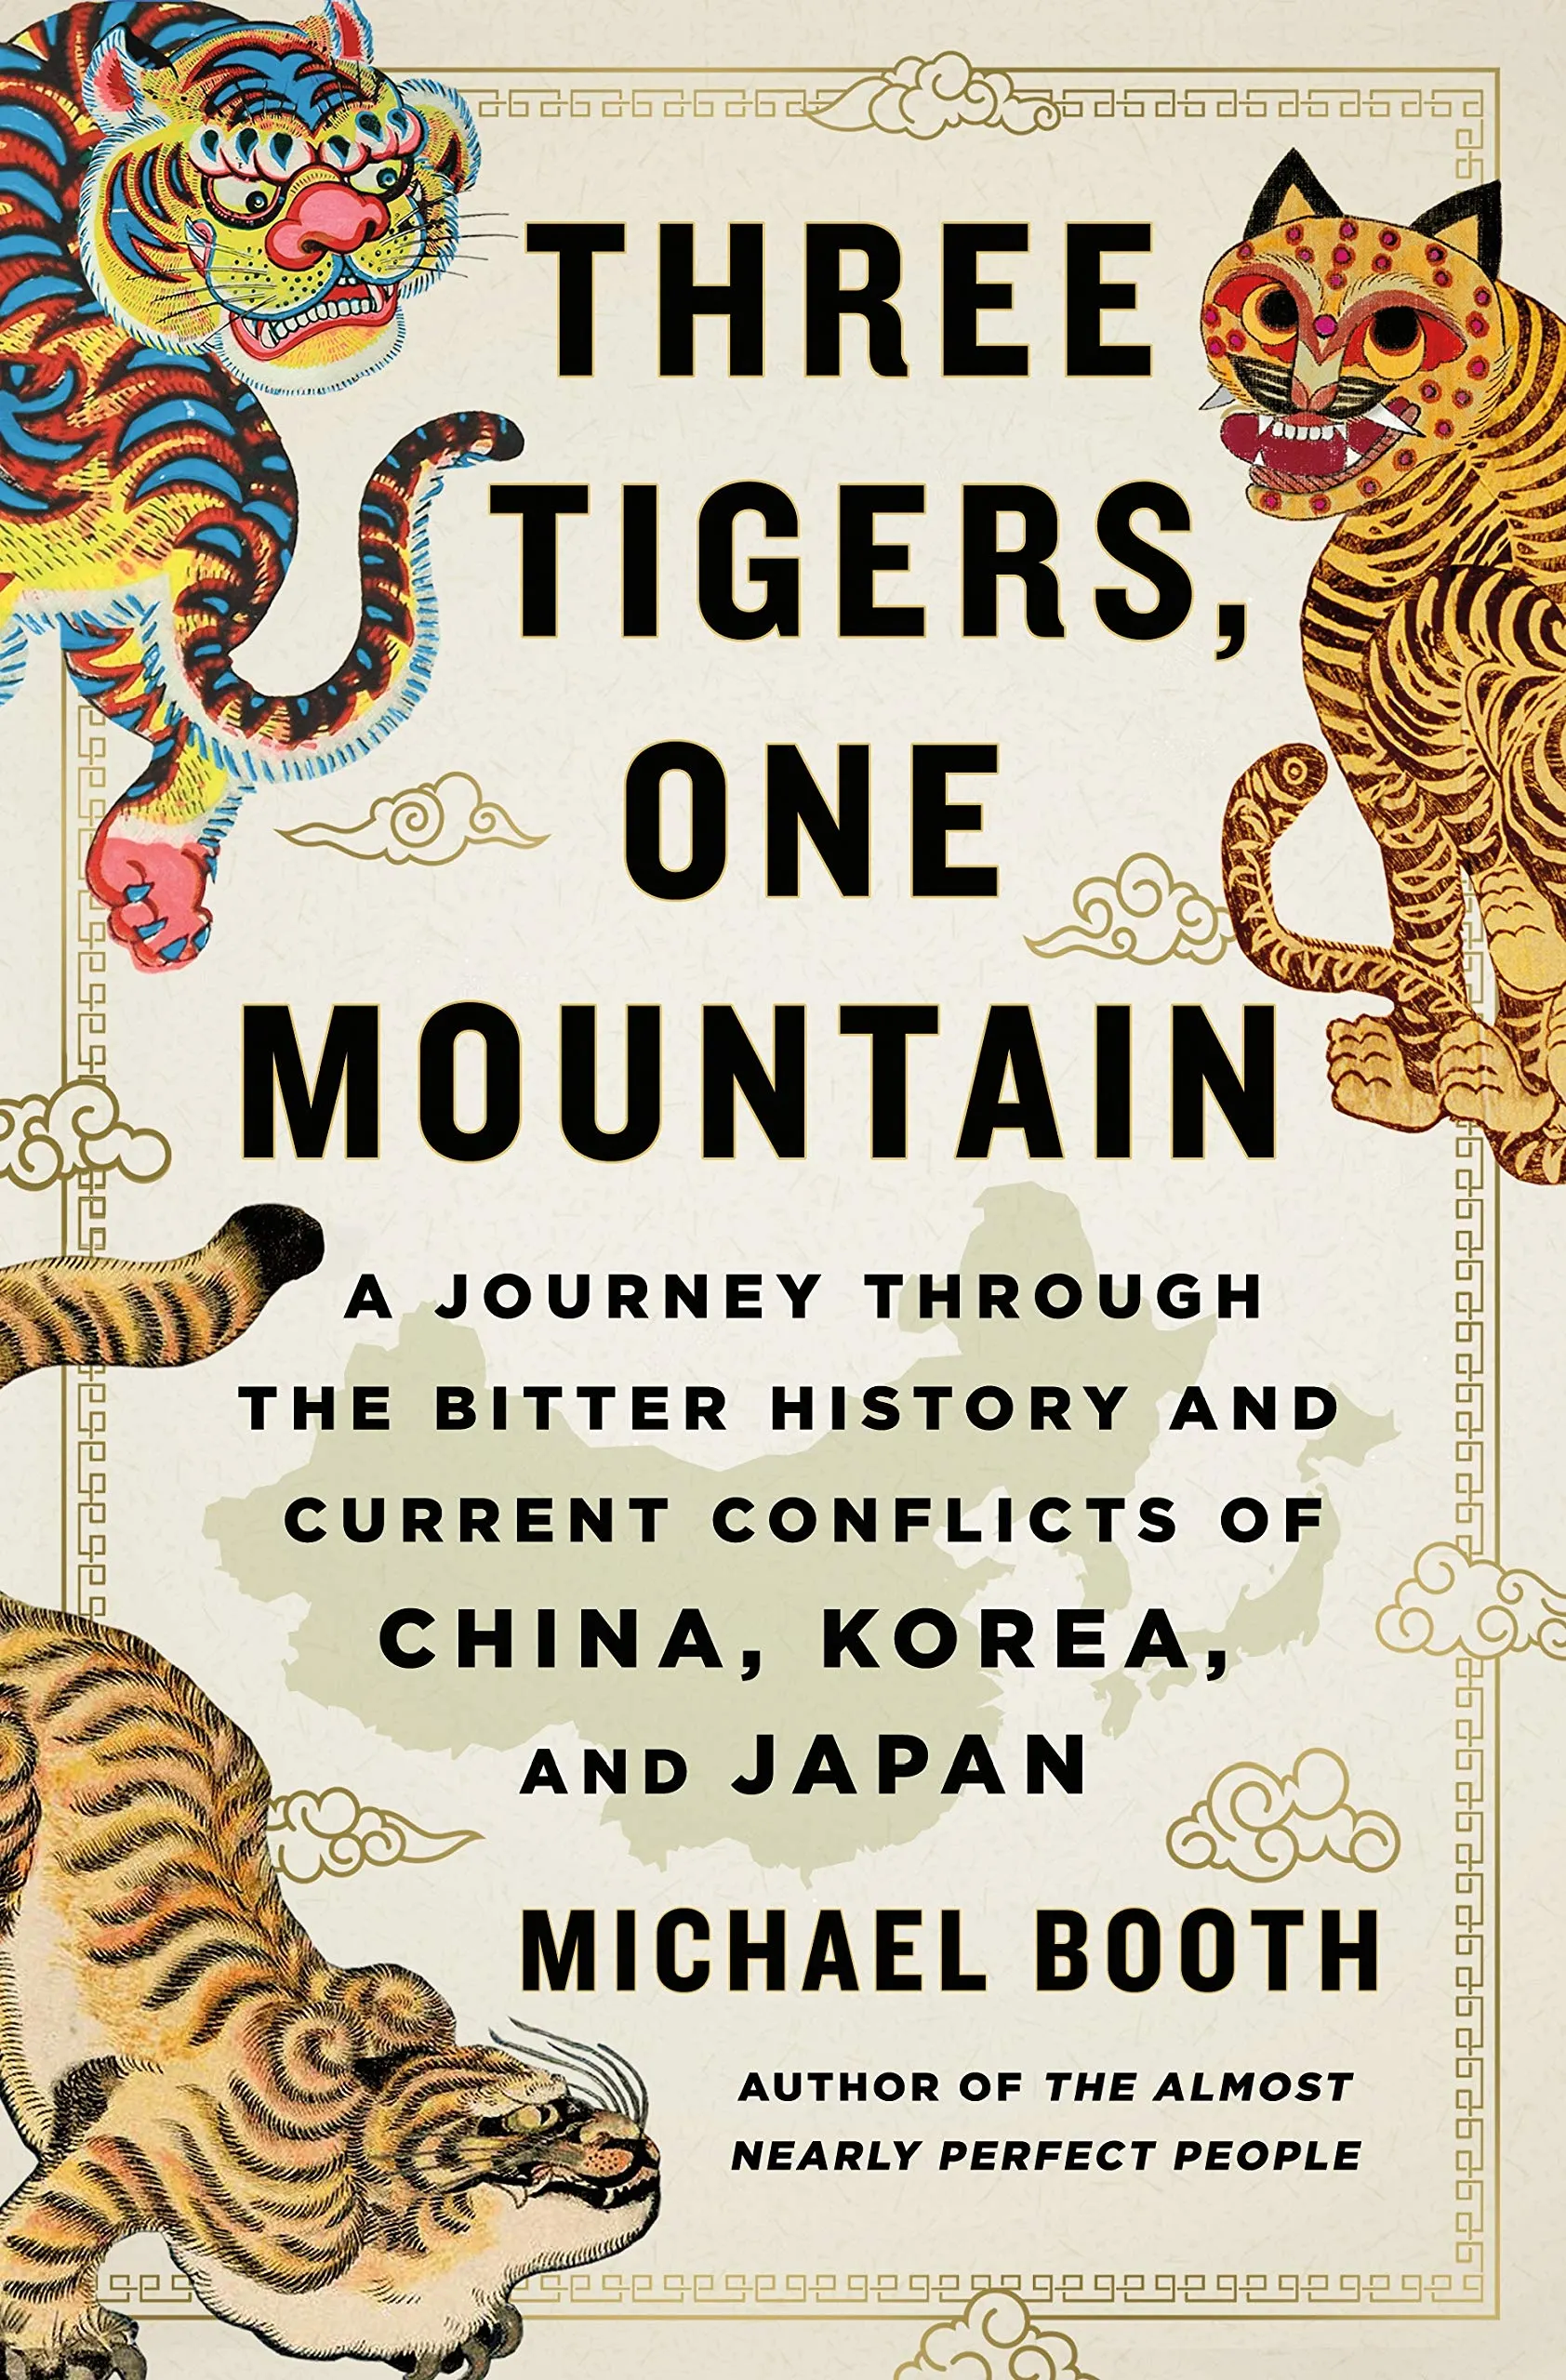 Three Tigers, One Mountain, Michael Booth